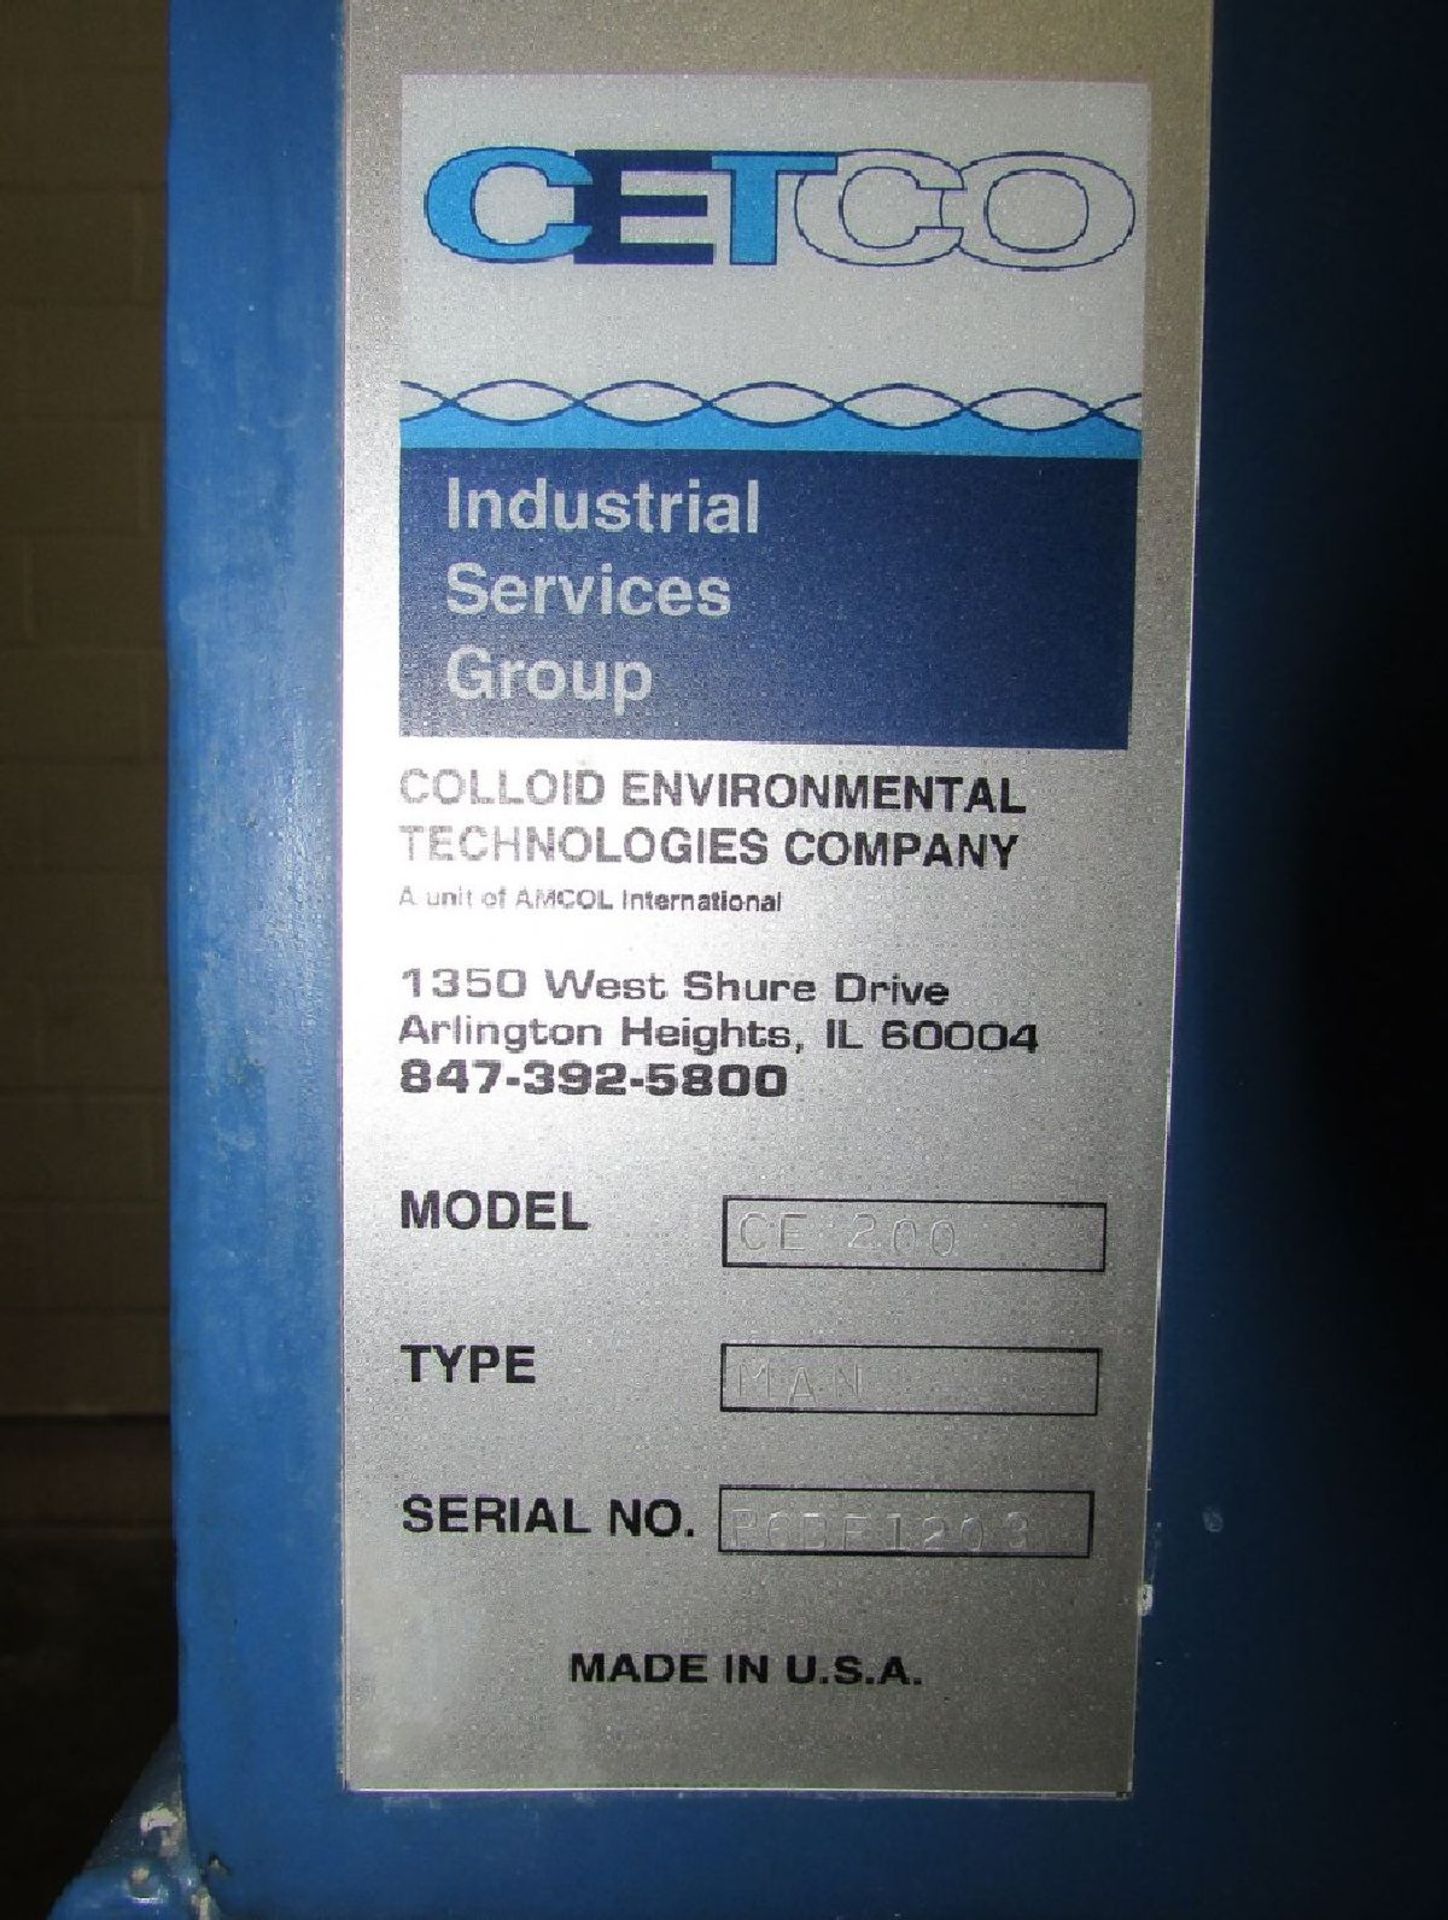 Cetco Model CE200 - Type MAN Water Treatment System - Image 13 of 13